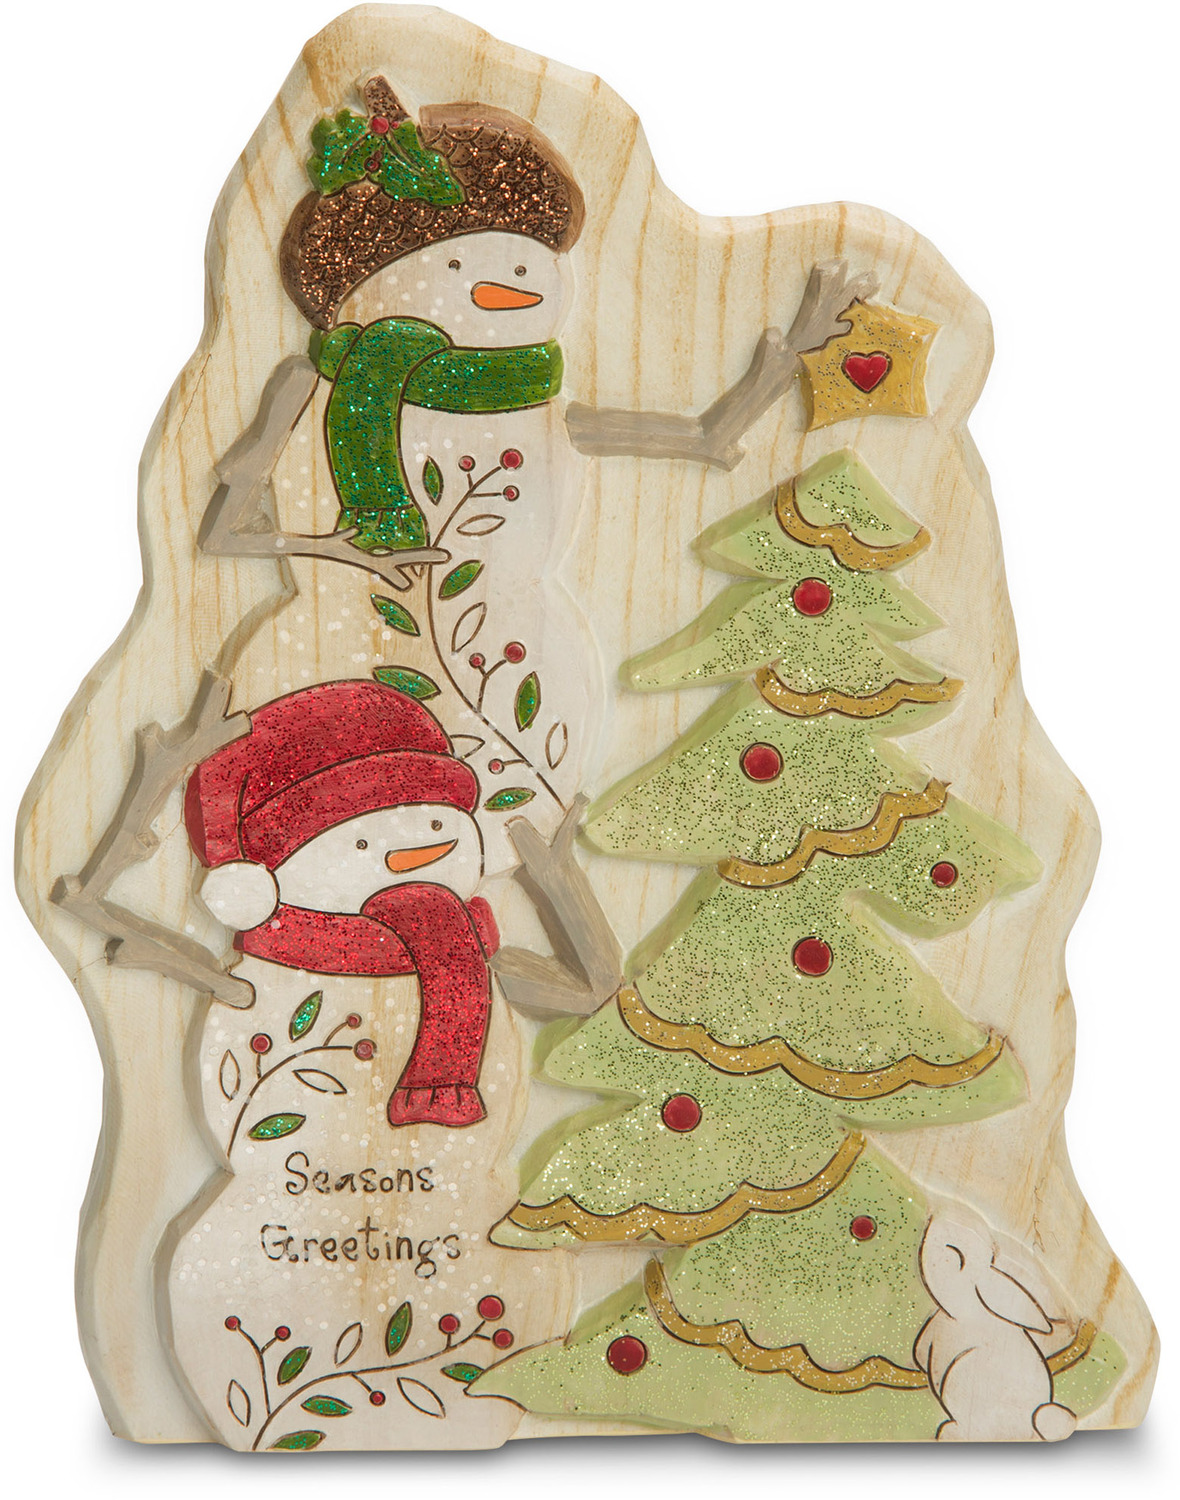 Seasons Greetings by Heavenly Winter Woods - <em>Traditions</em> - Christmas Snowman Plaque-